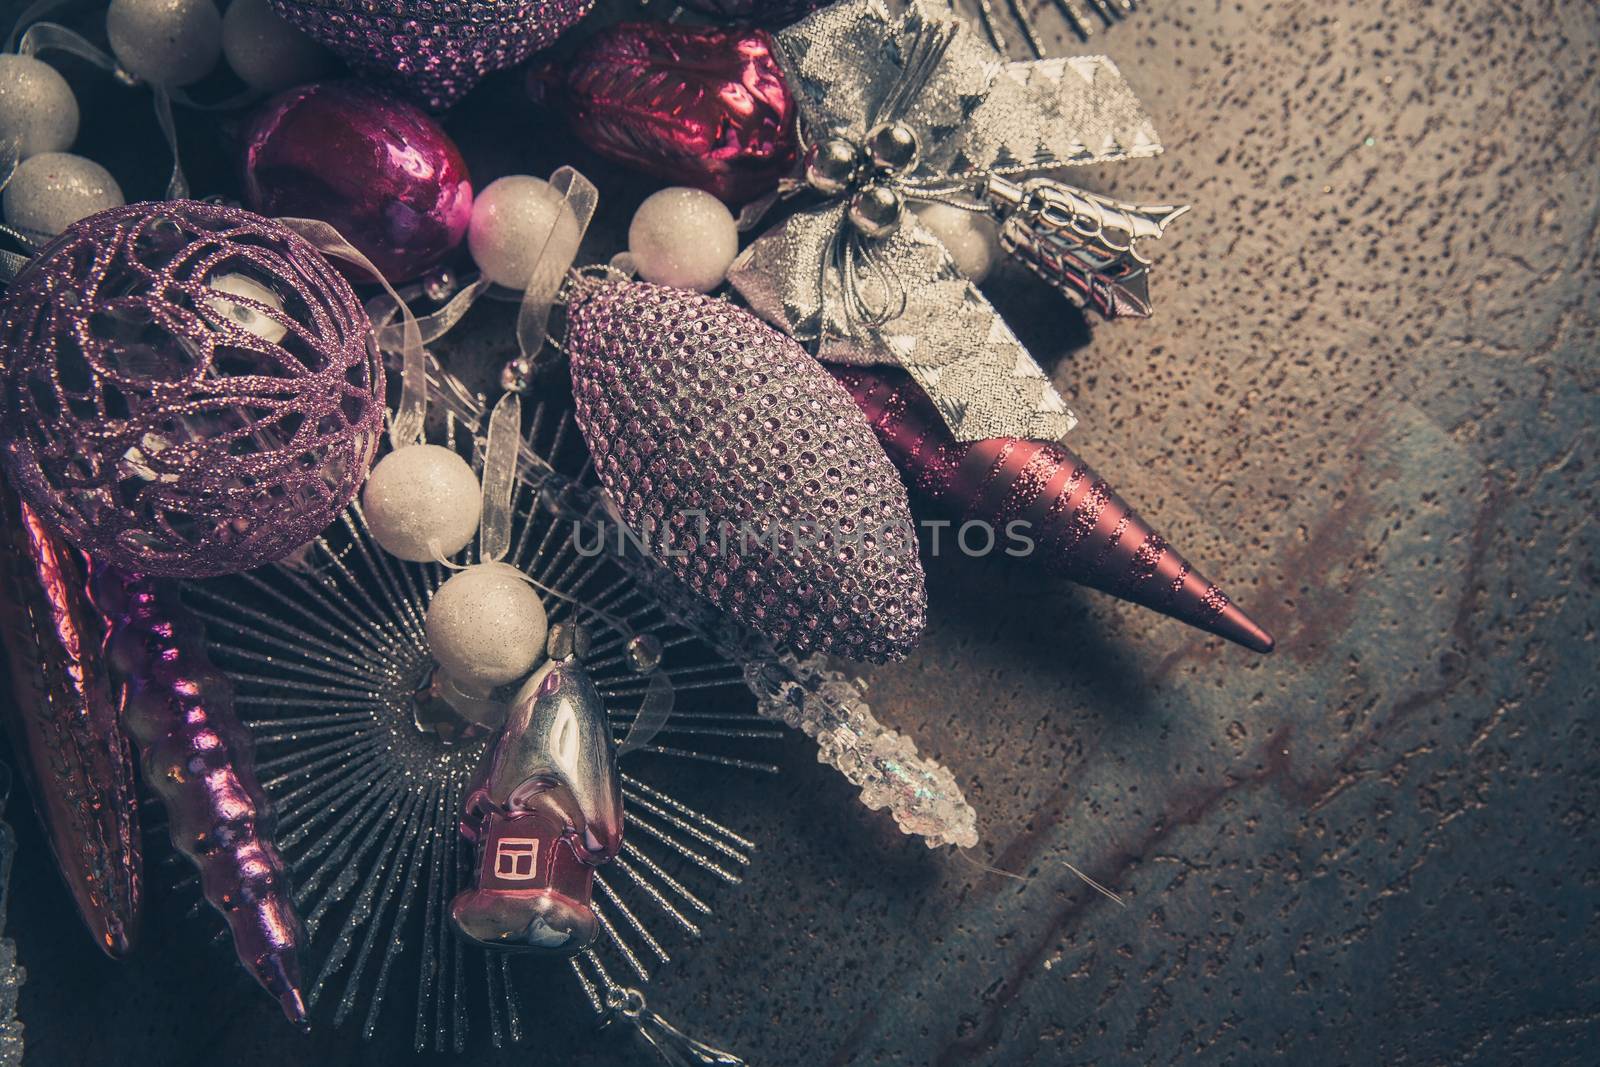 vintage christmas 2019 background with colorful toys on dark surface